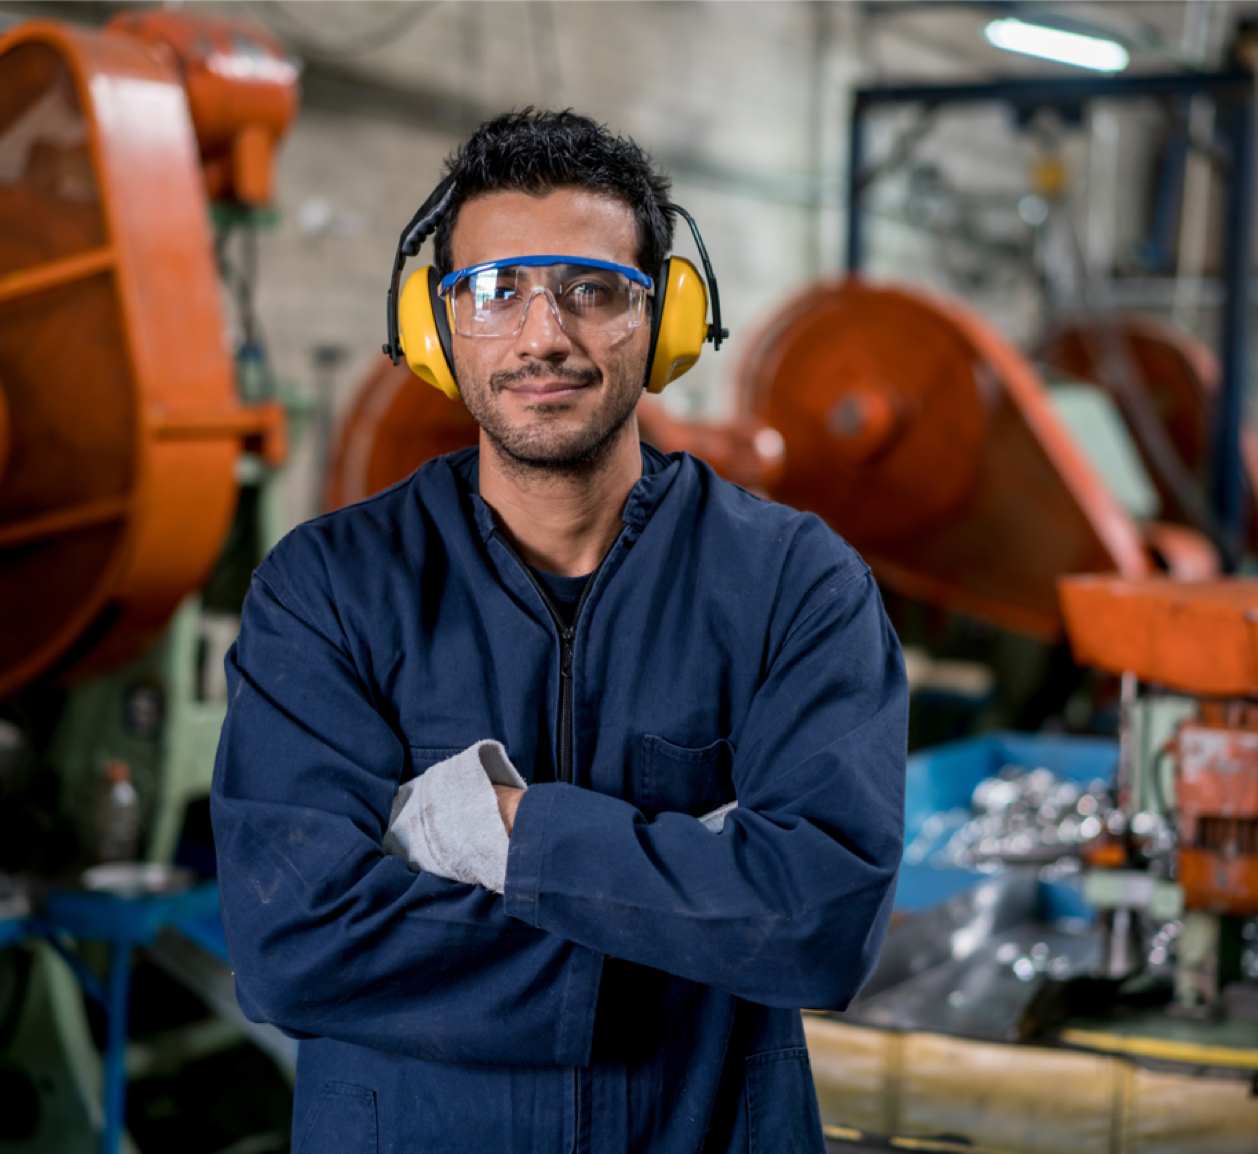 Man wearing goggles and sound ear muffs